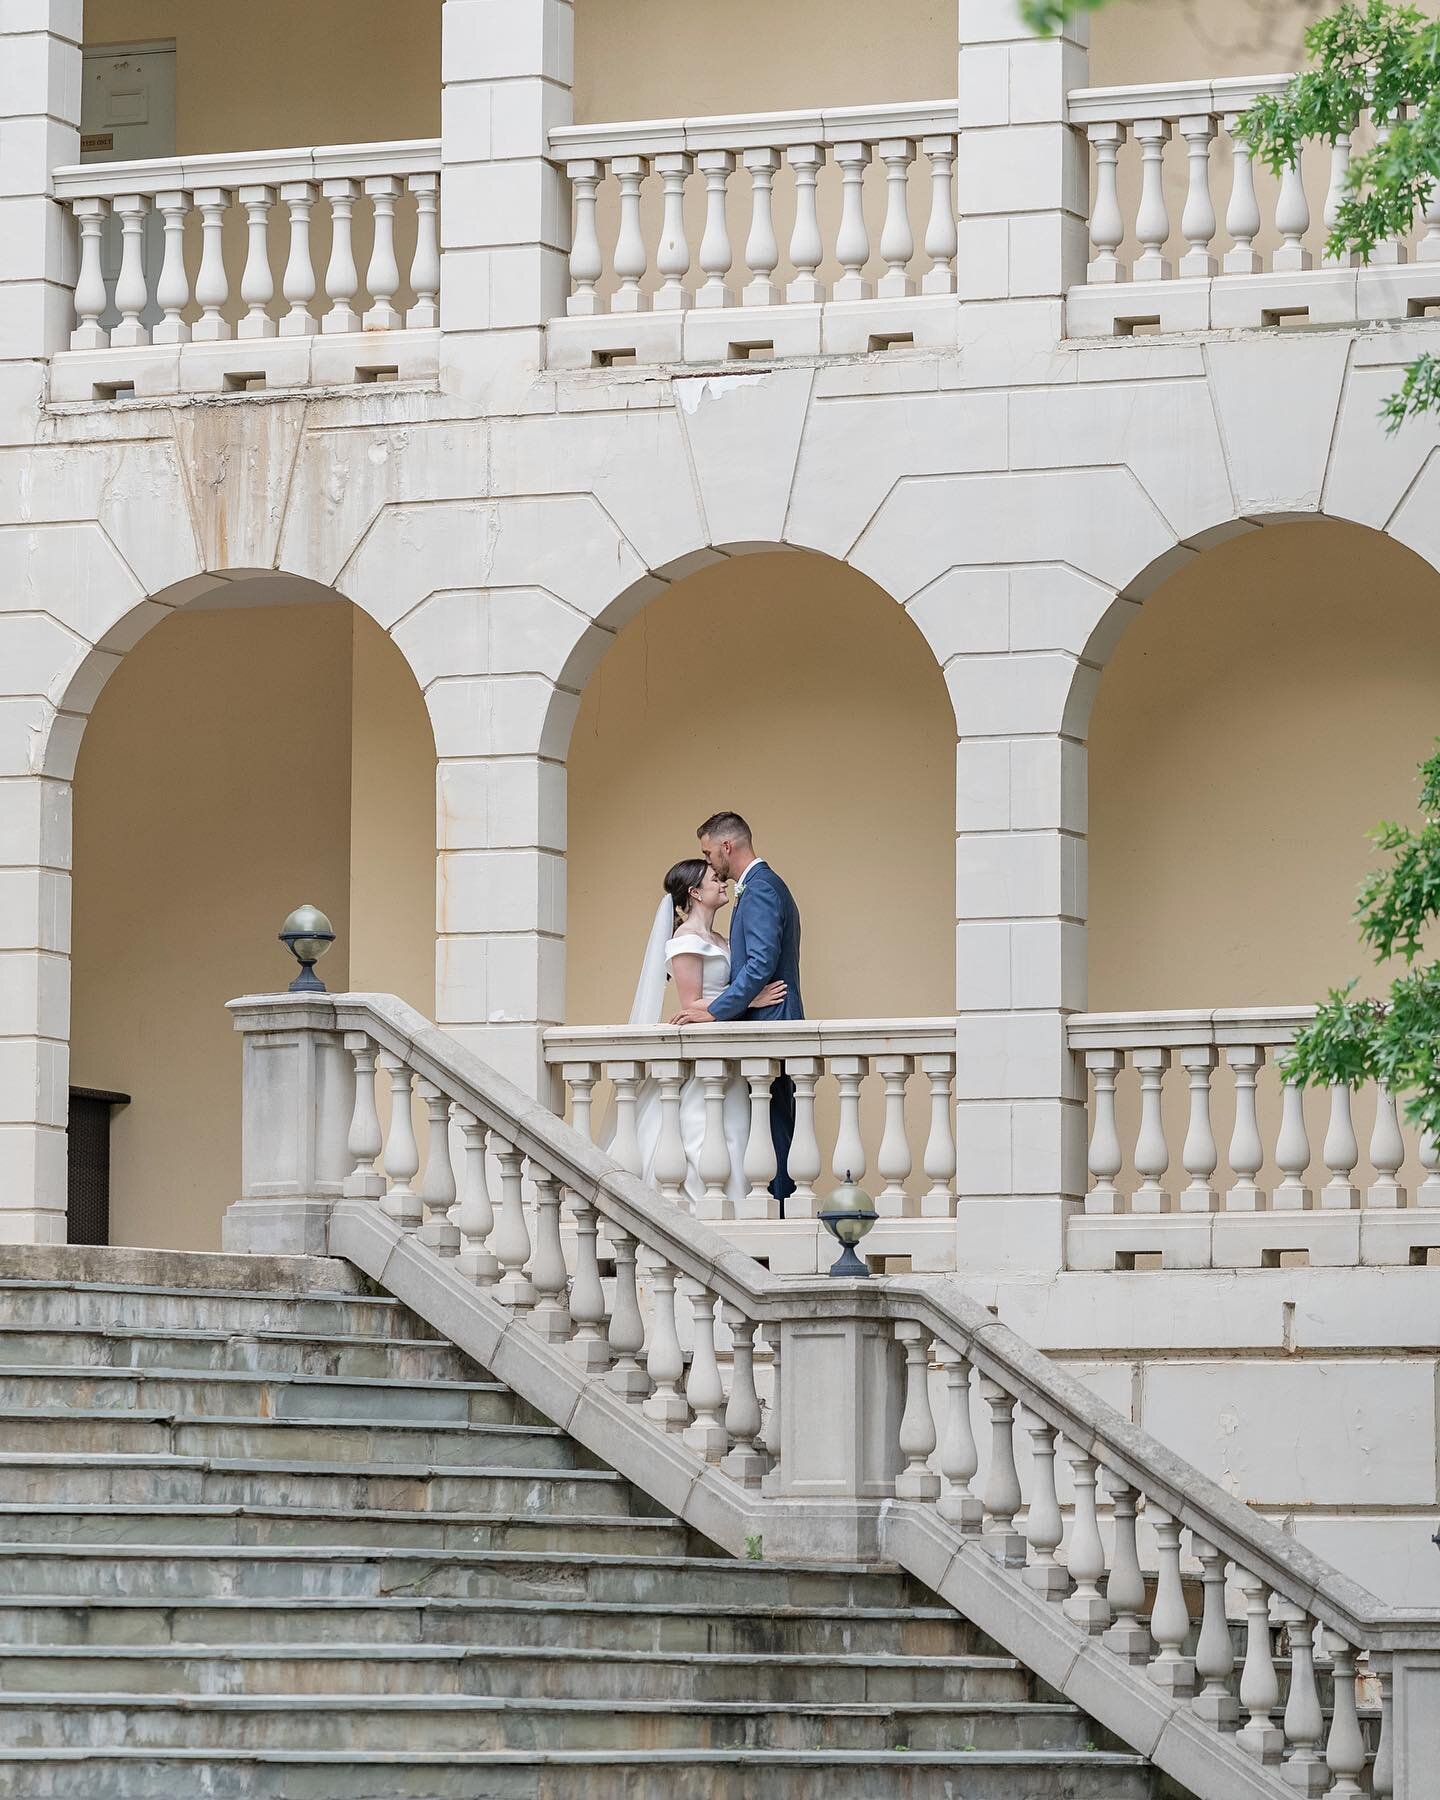 The Spanish steps at @airlieva are such a classic backdrop. We had a blast at yesterday&rsquo;s wedding and we are packing everything up again for another great wedding today! 
.
.
.
.
.
#weddingphotography #weddingphotographer #sonyphotography #sony